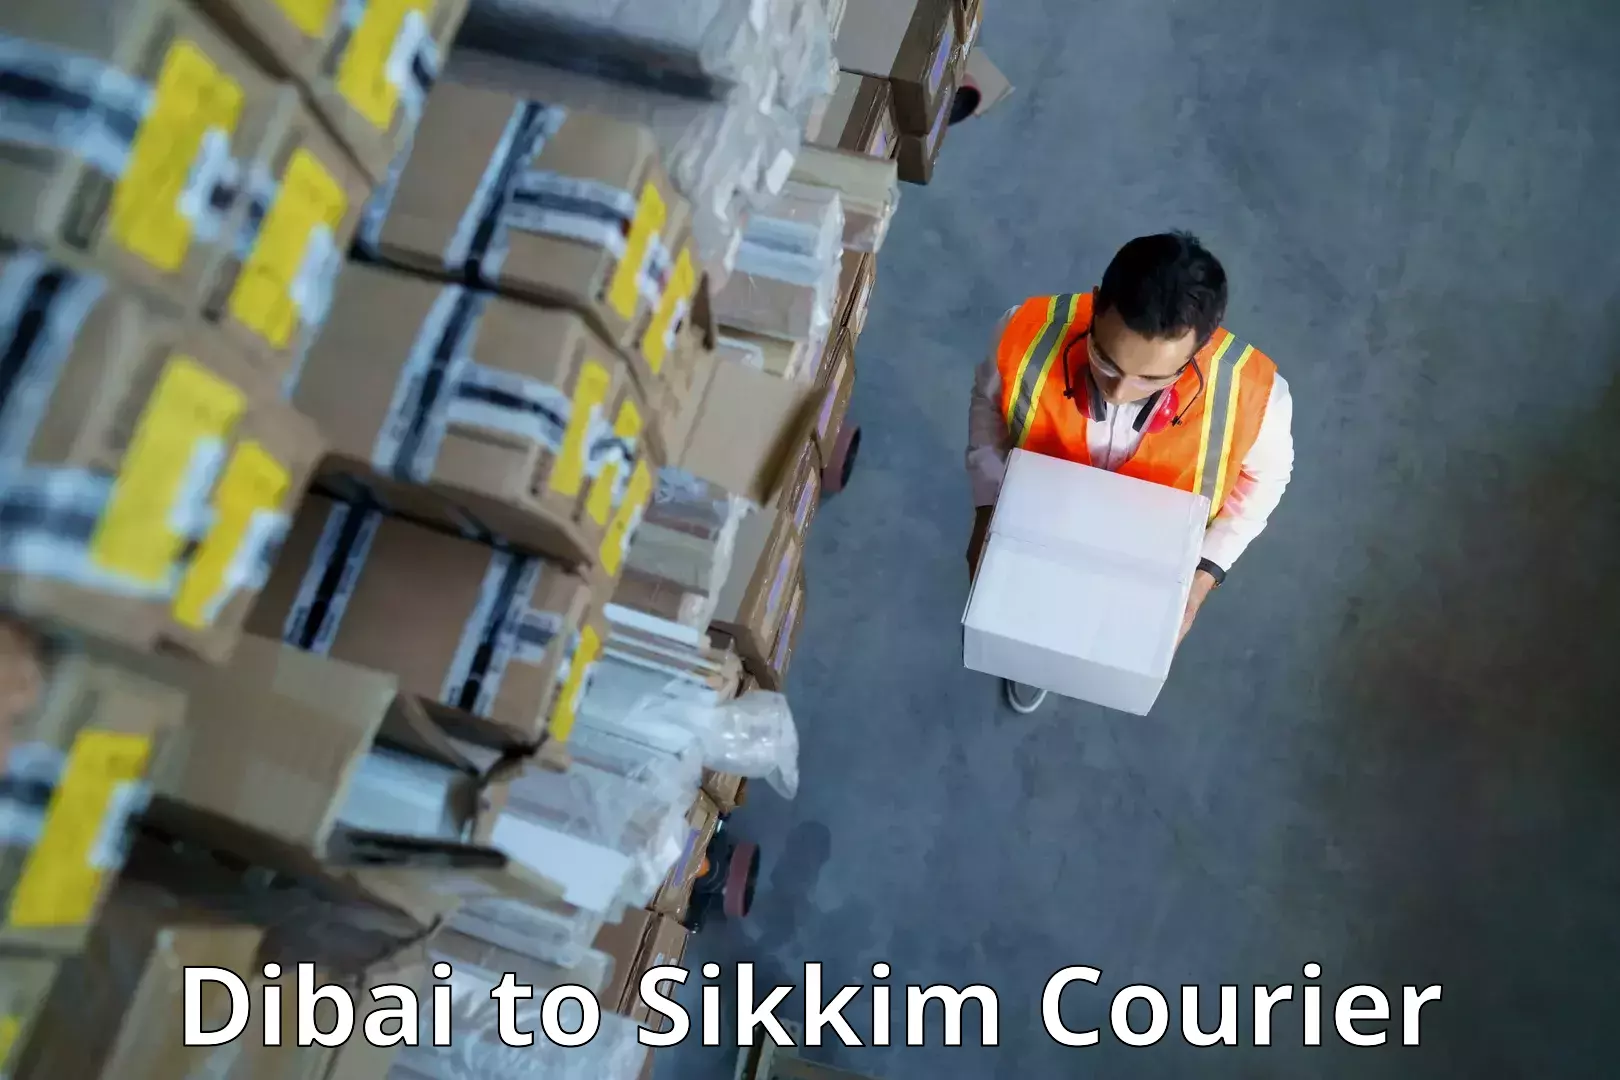 State-of-the-art courier technology Dibai to Sikkim